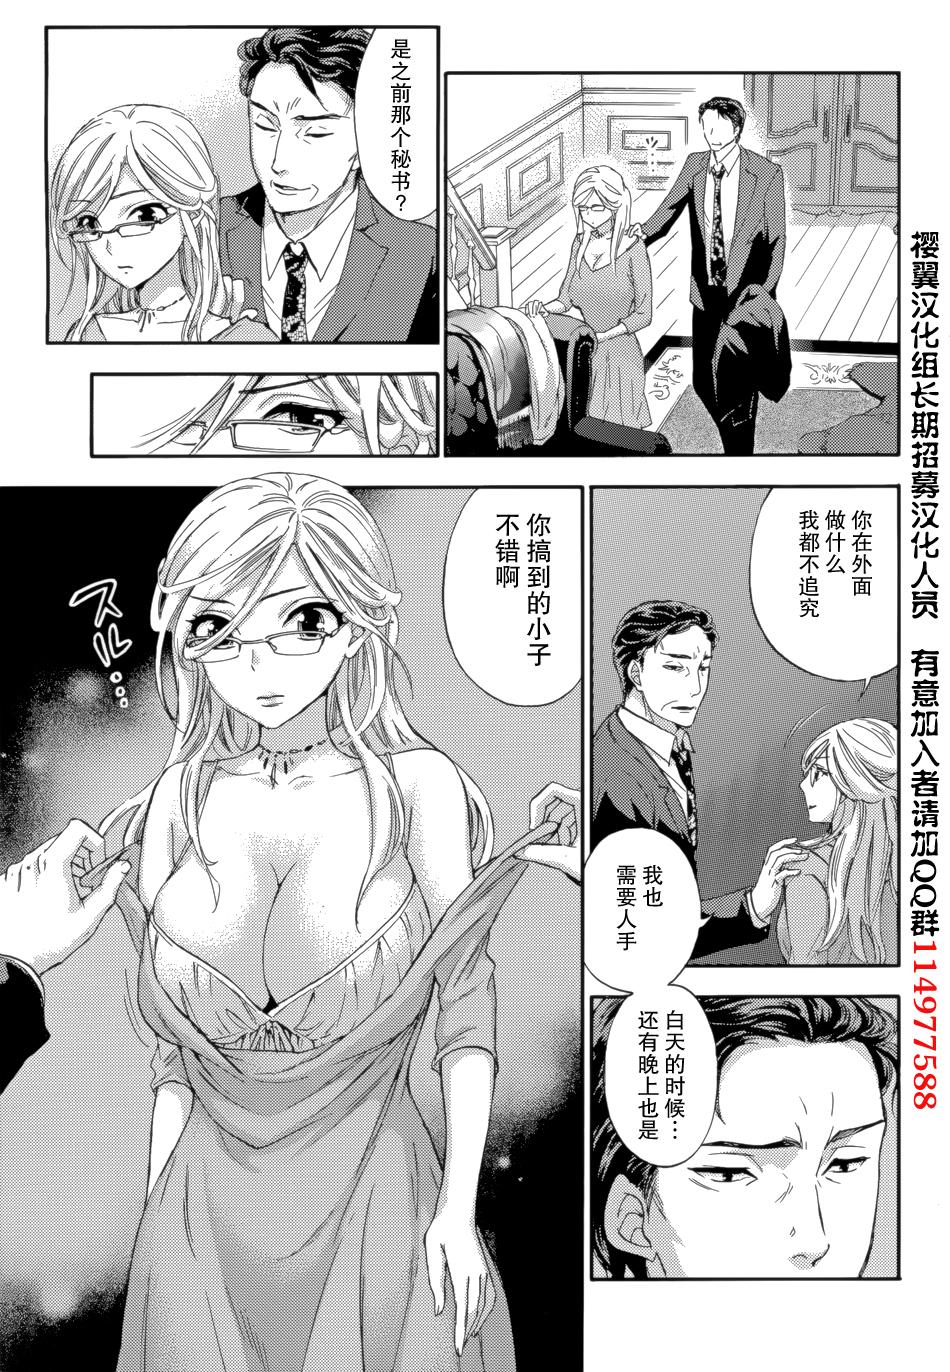 Cream HUNDRED GAME Ch. 9 Slapping - Page 7